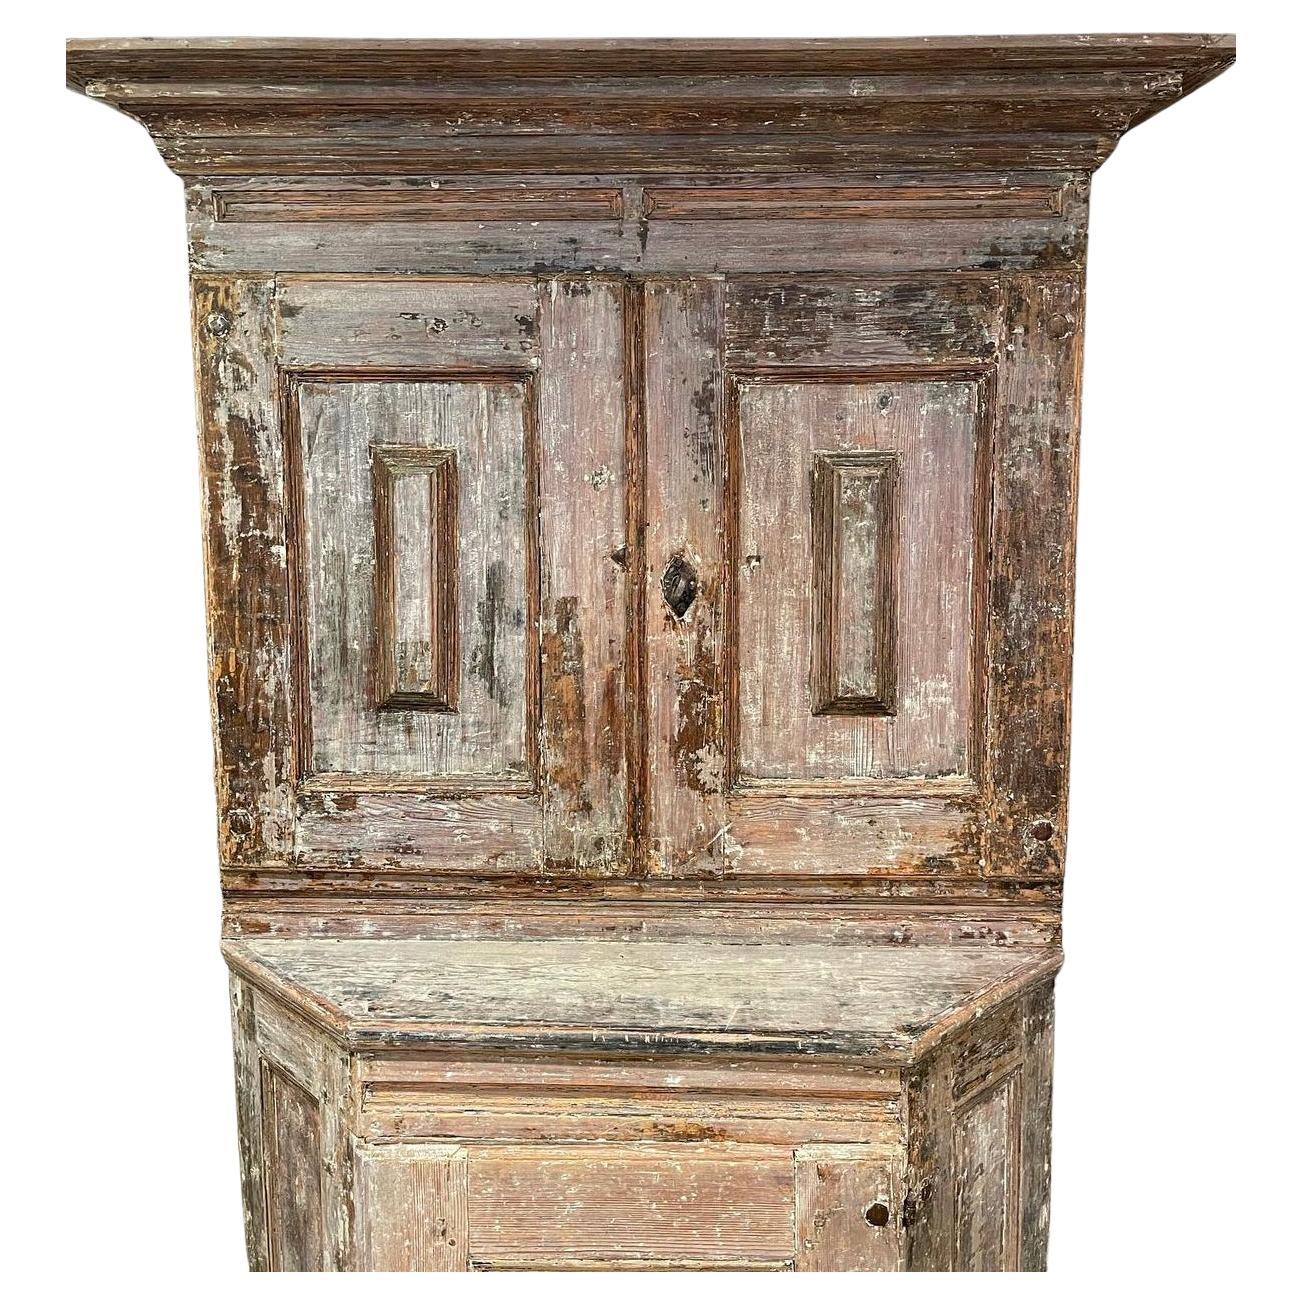 Stunning 18th century baroque Swedish cabinet. This amazing piece has been dry scrapped down to showcase traces of the original paint. Lots of neutral tones run through out this unique piece. Two doors feature shelves behind each cupboard which